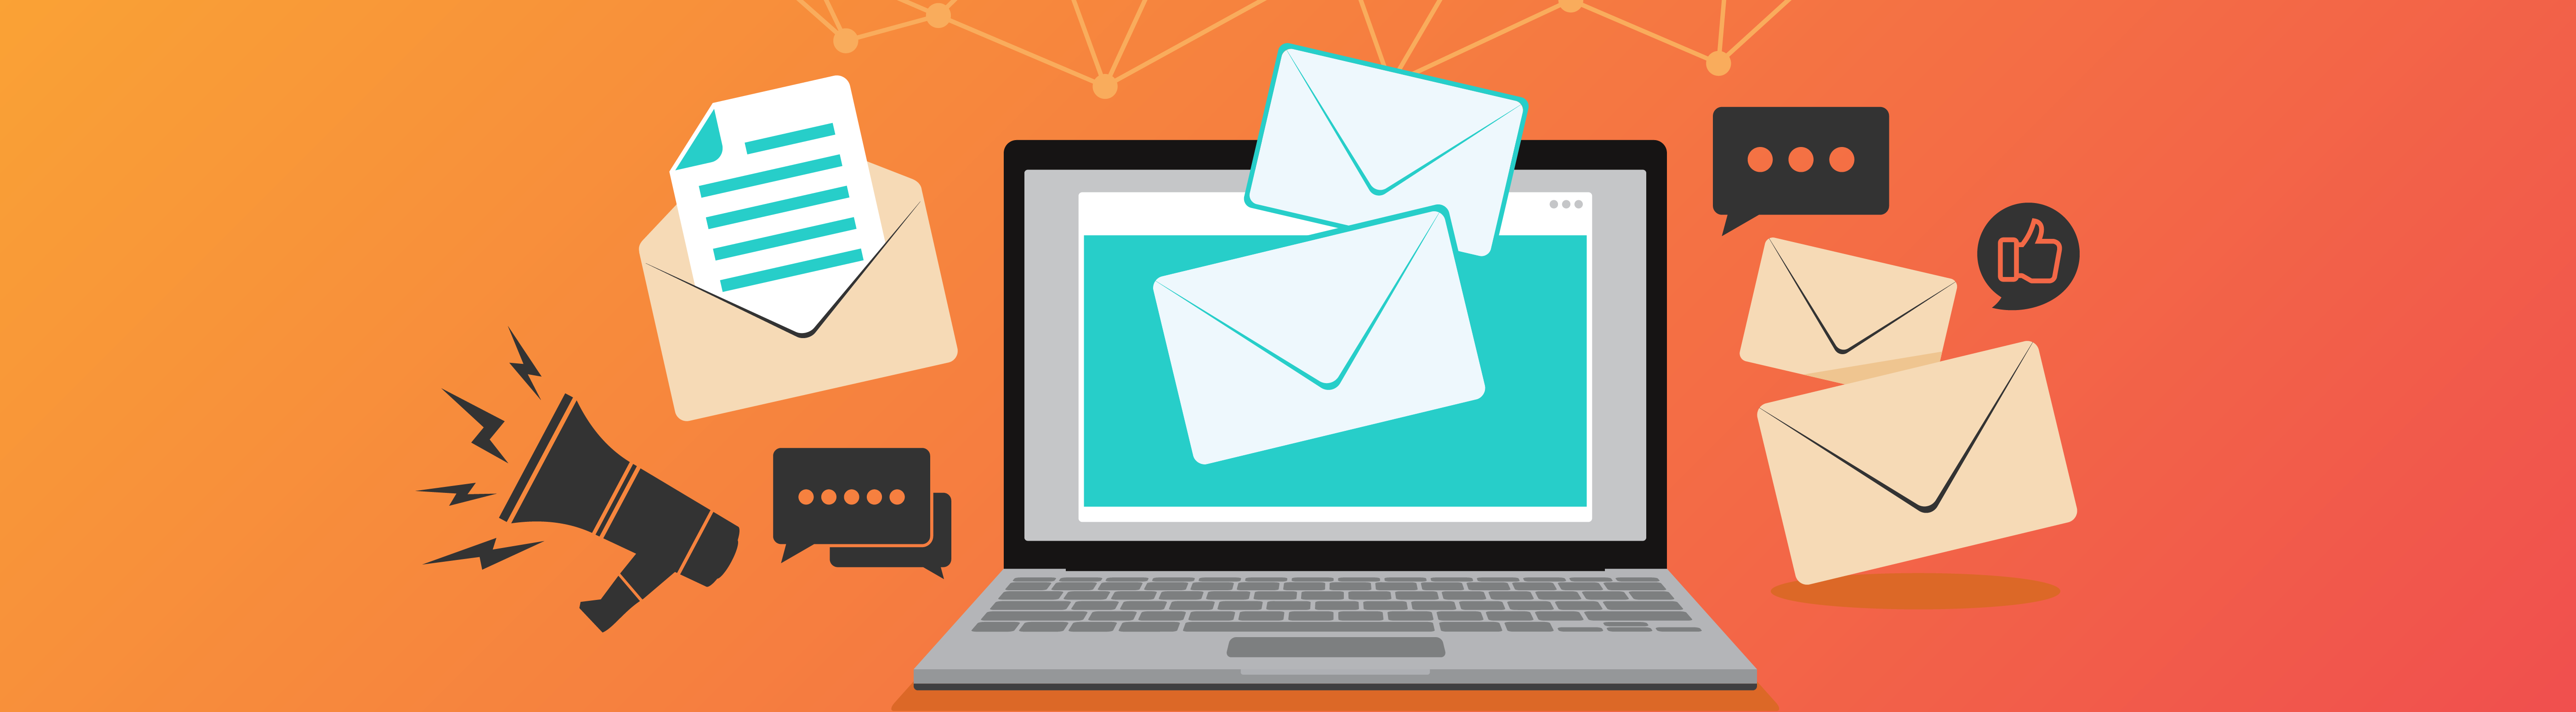 Email Automation: Comparing the Top Tools Used to Drive More Sales